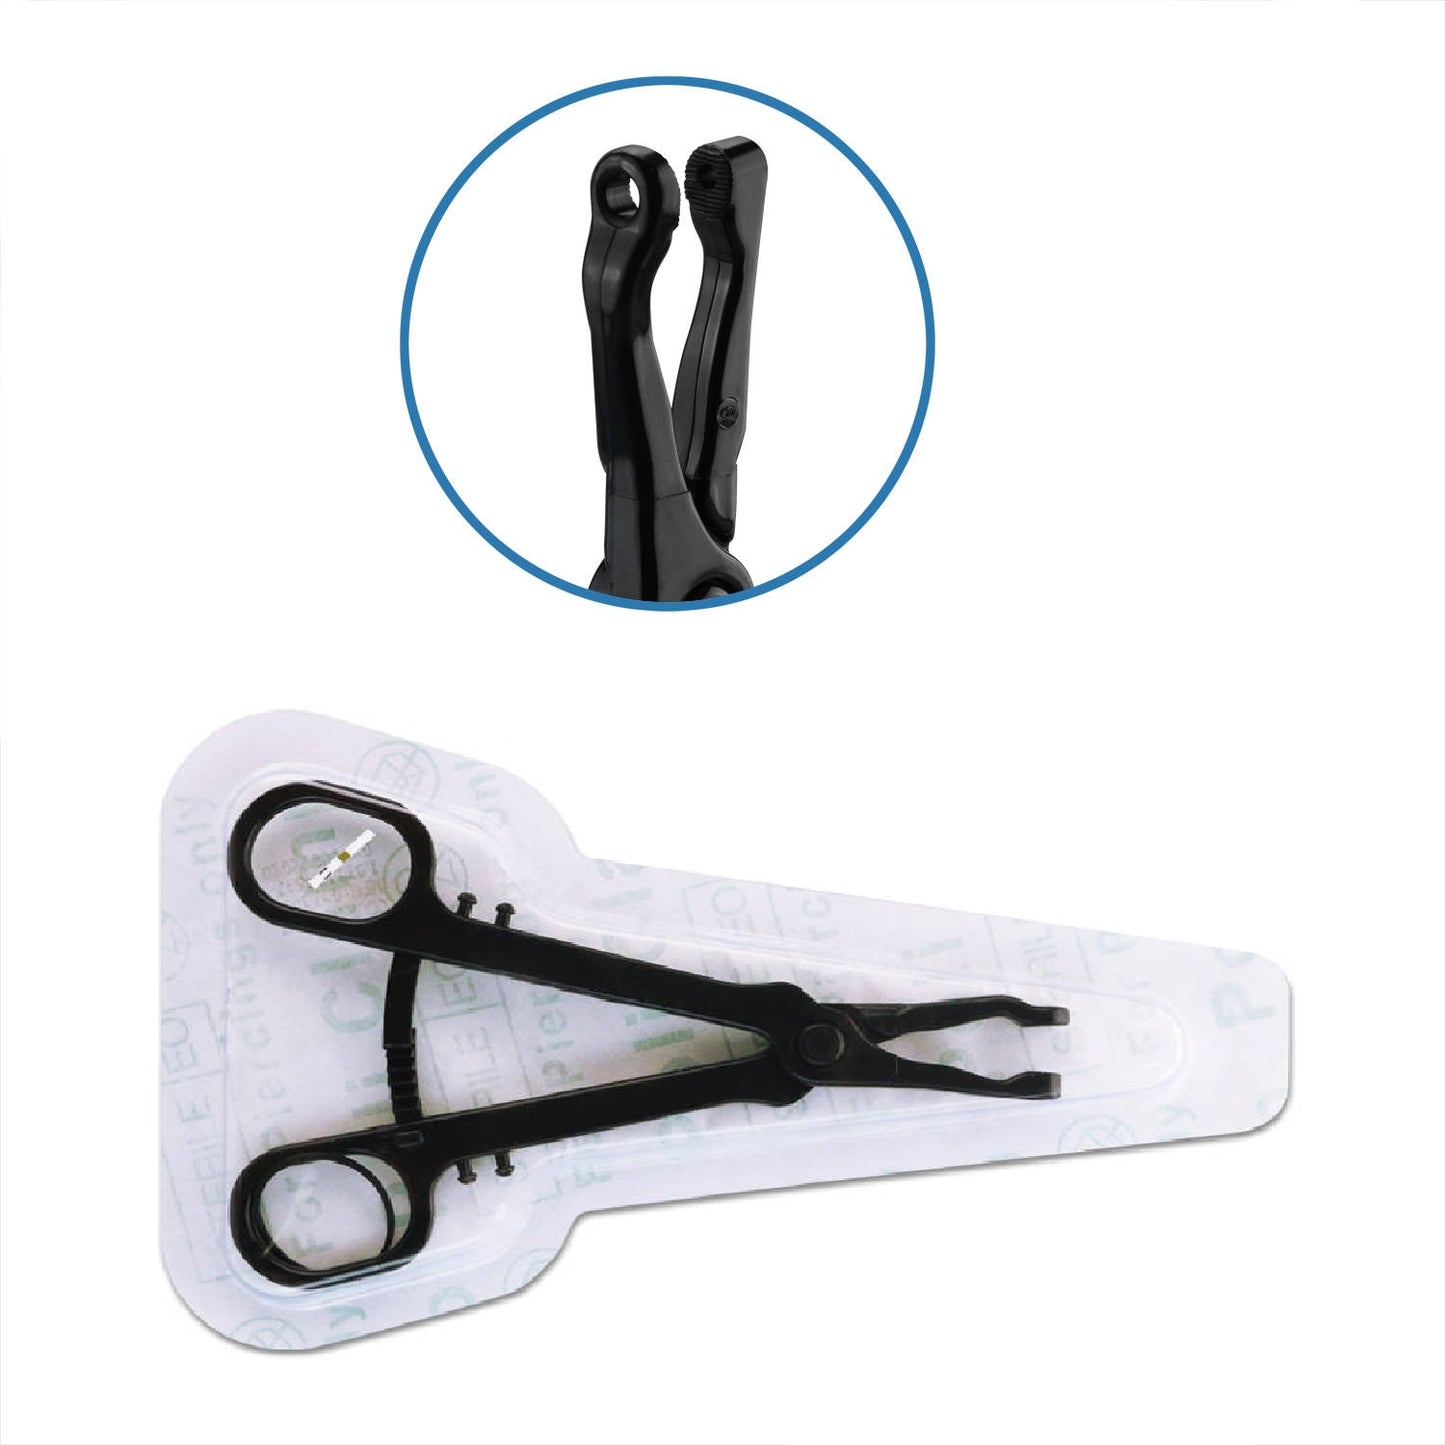 Tools - Disposable Septum Forceps